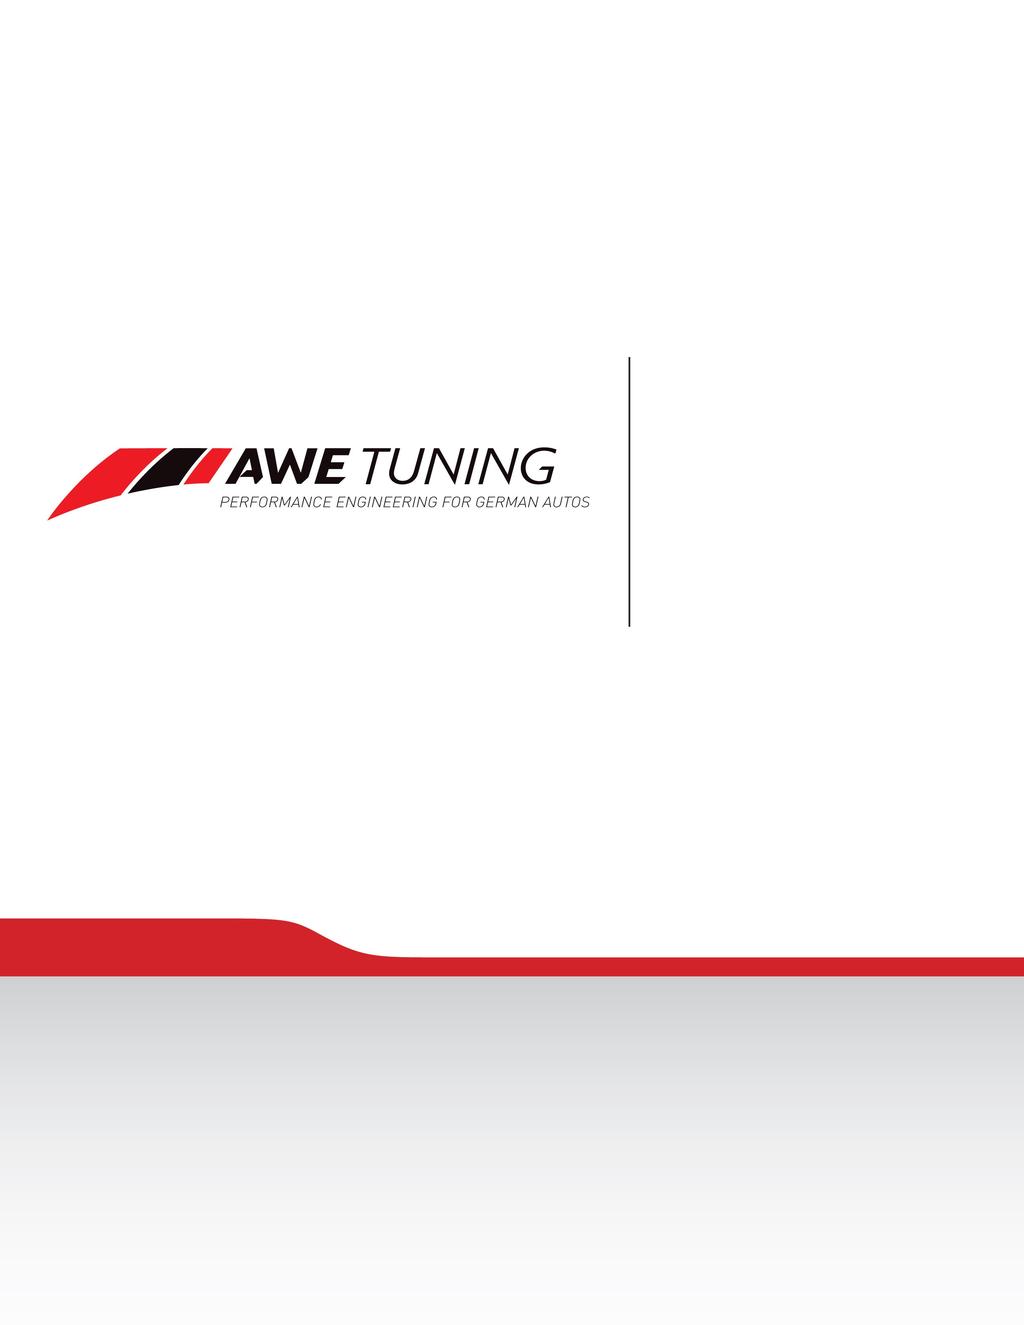 INSTALLATION GUIDE 2008-12 Audi S5 4.2L Track Edition Exhaust System 90mm Tips Congratulations on your purchase of the AWE Tuning Track Edition exhaust for the 2008-12 Audi S5 4.2L V8.